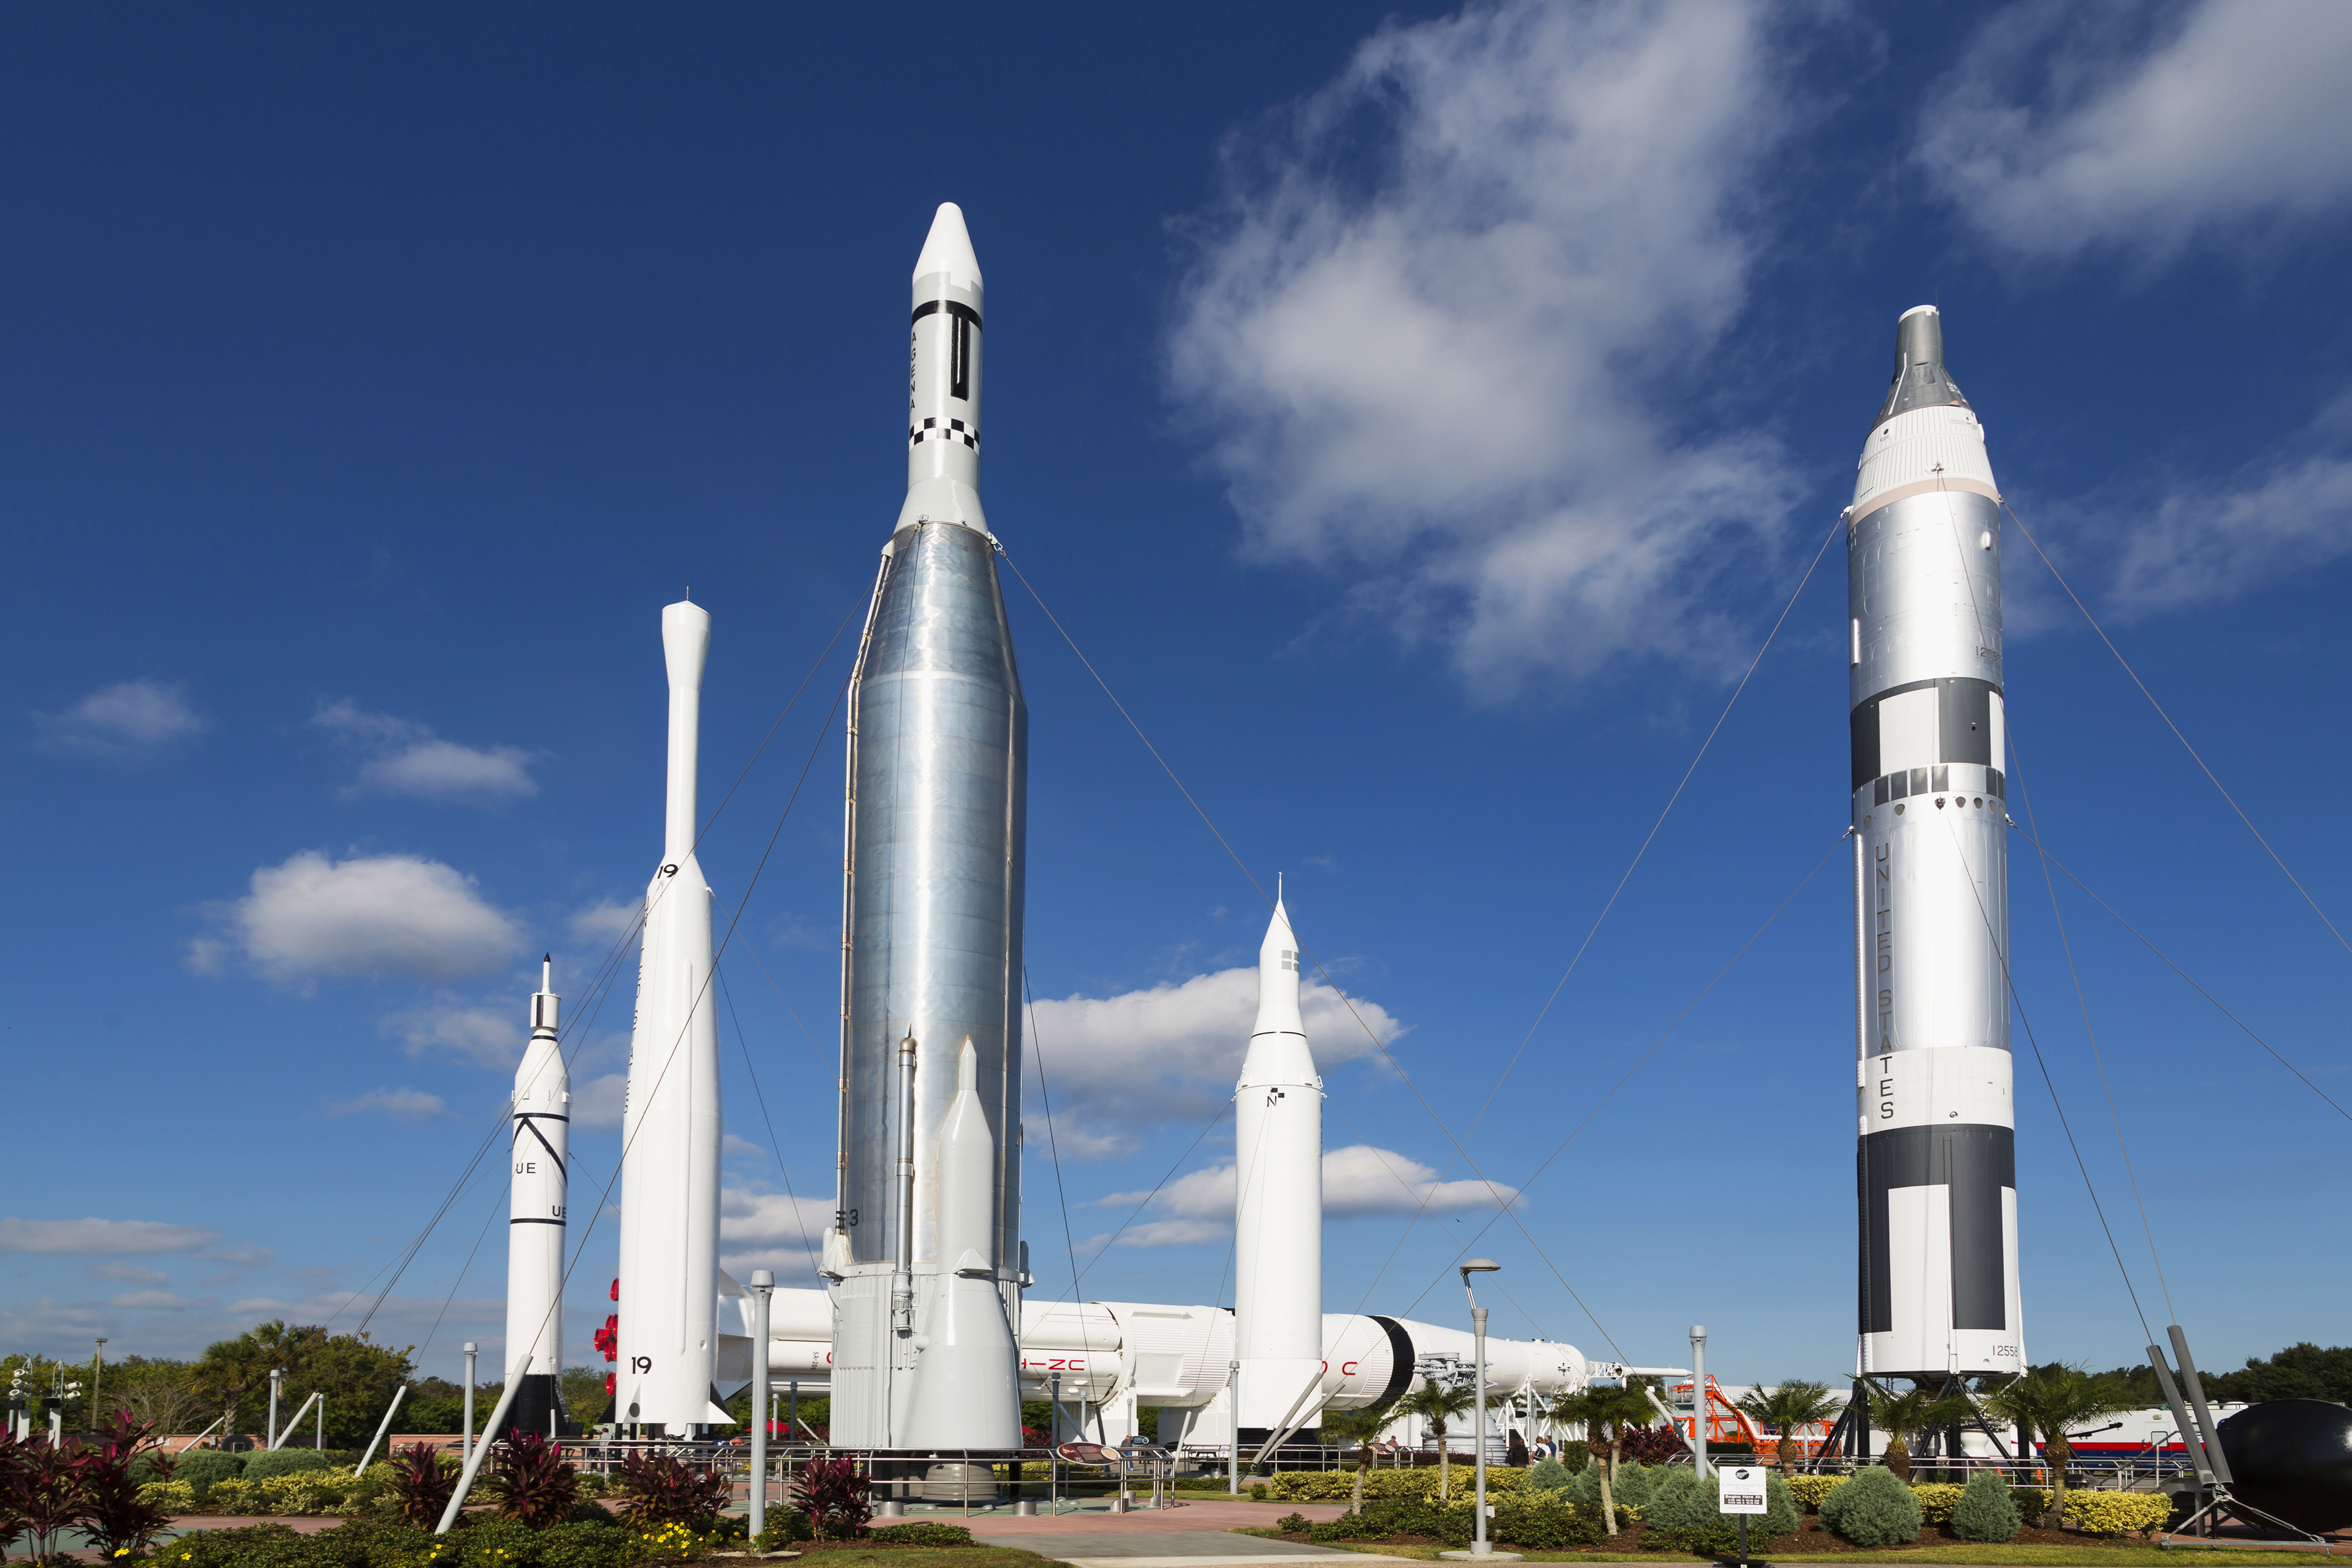 Best Things to Do in Orlando for an Epic Family Vacation - Kennedy Space Center Rocket Garden